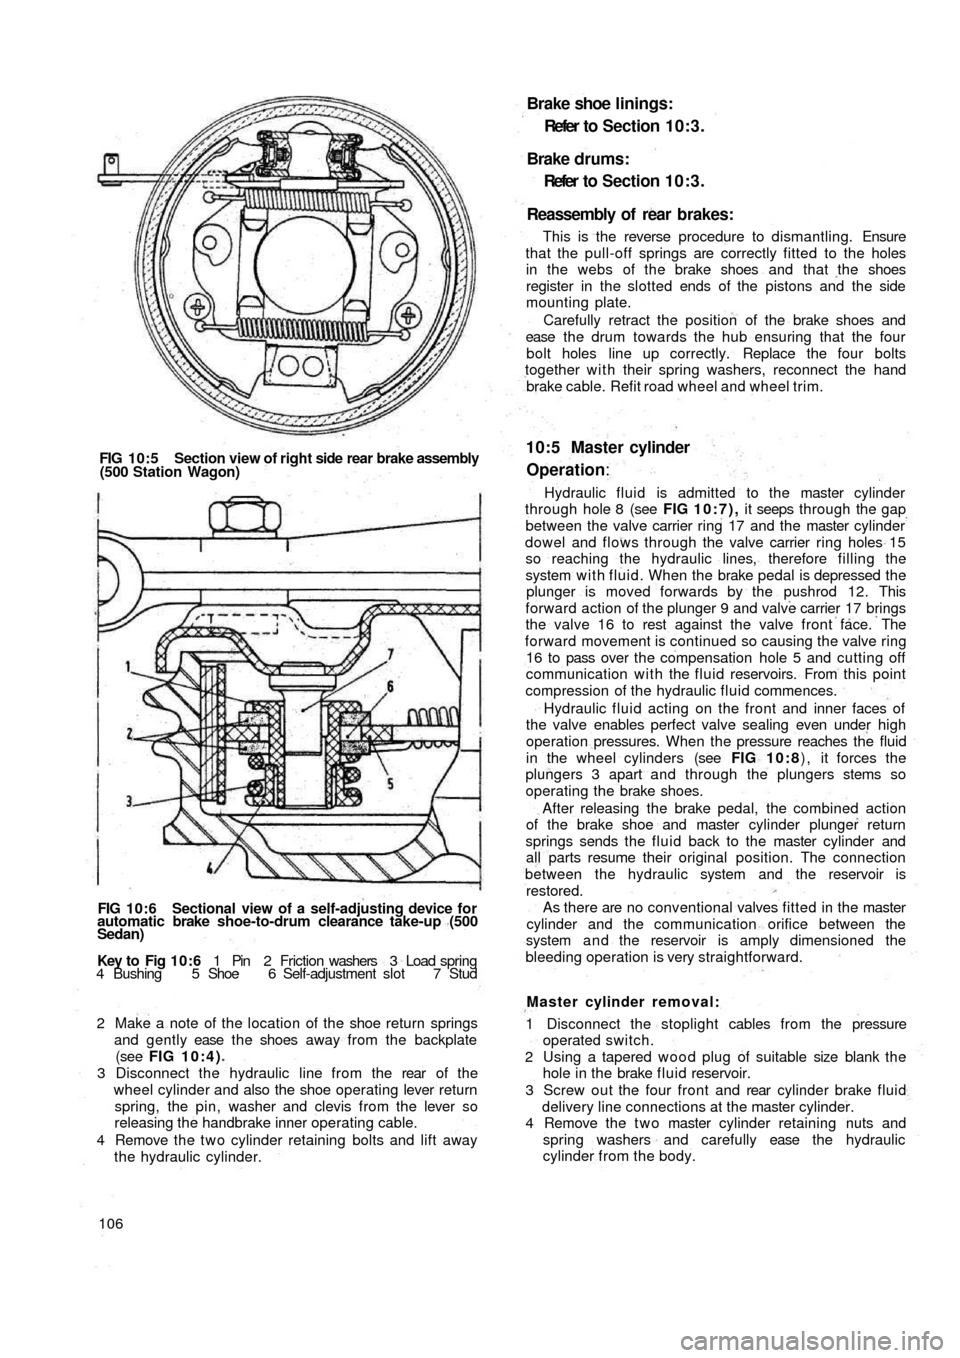 FIAT 500 1959 1.G Workshop Manual FIG 10:5 Section view of right side rear brake assembly
(500 Station Wagon)
FIG 10:6 Sectional view of a self-adjusting device for
automatic brake shoe-to-drum clearance take-up (500
Sedan)
Key  to   